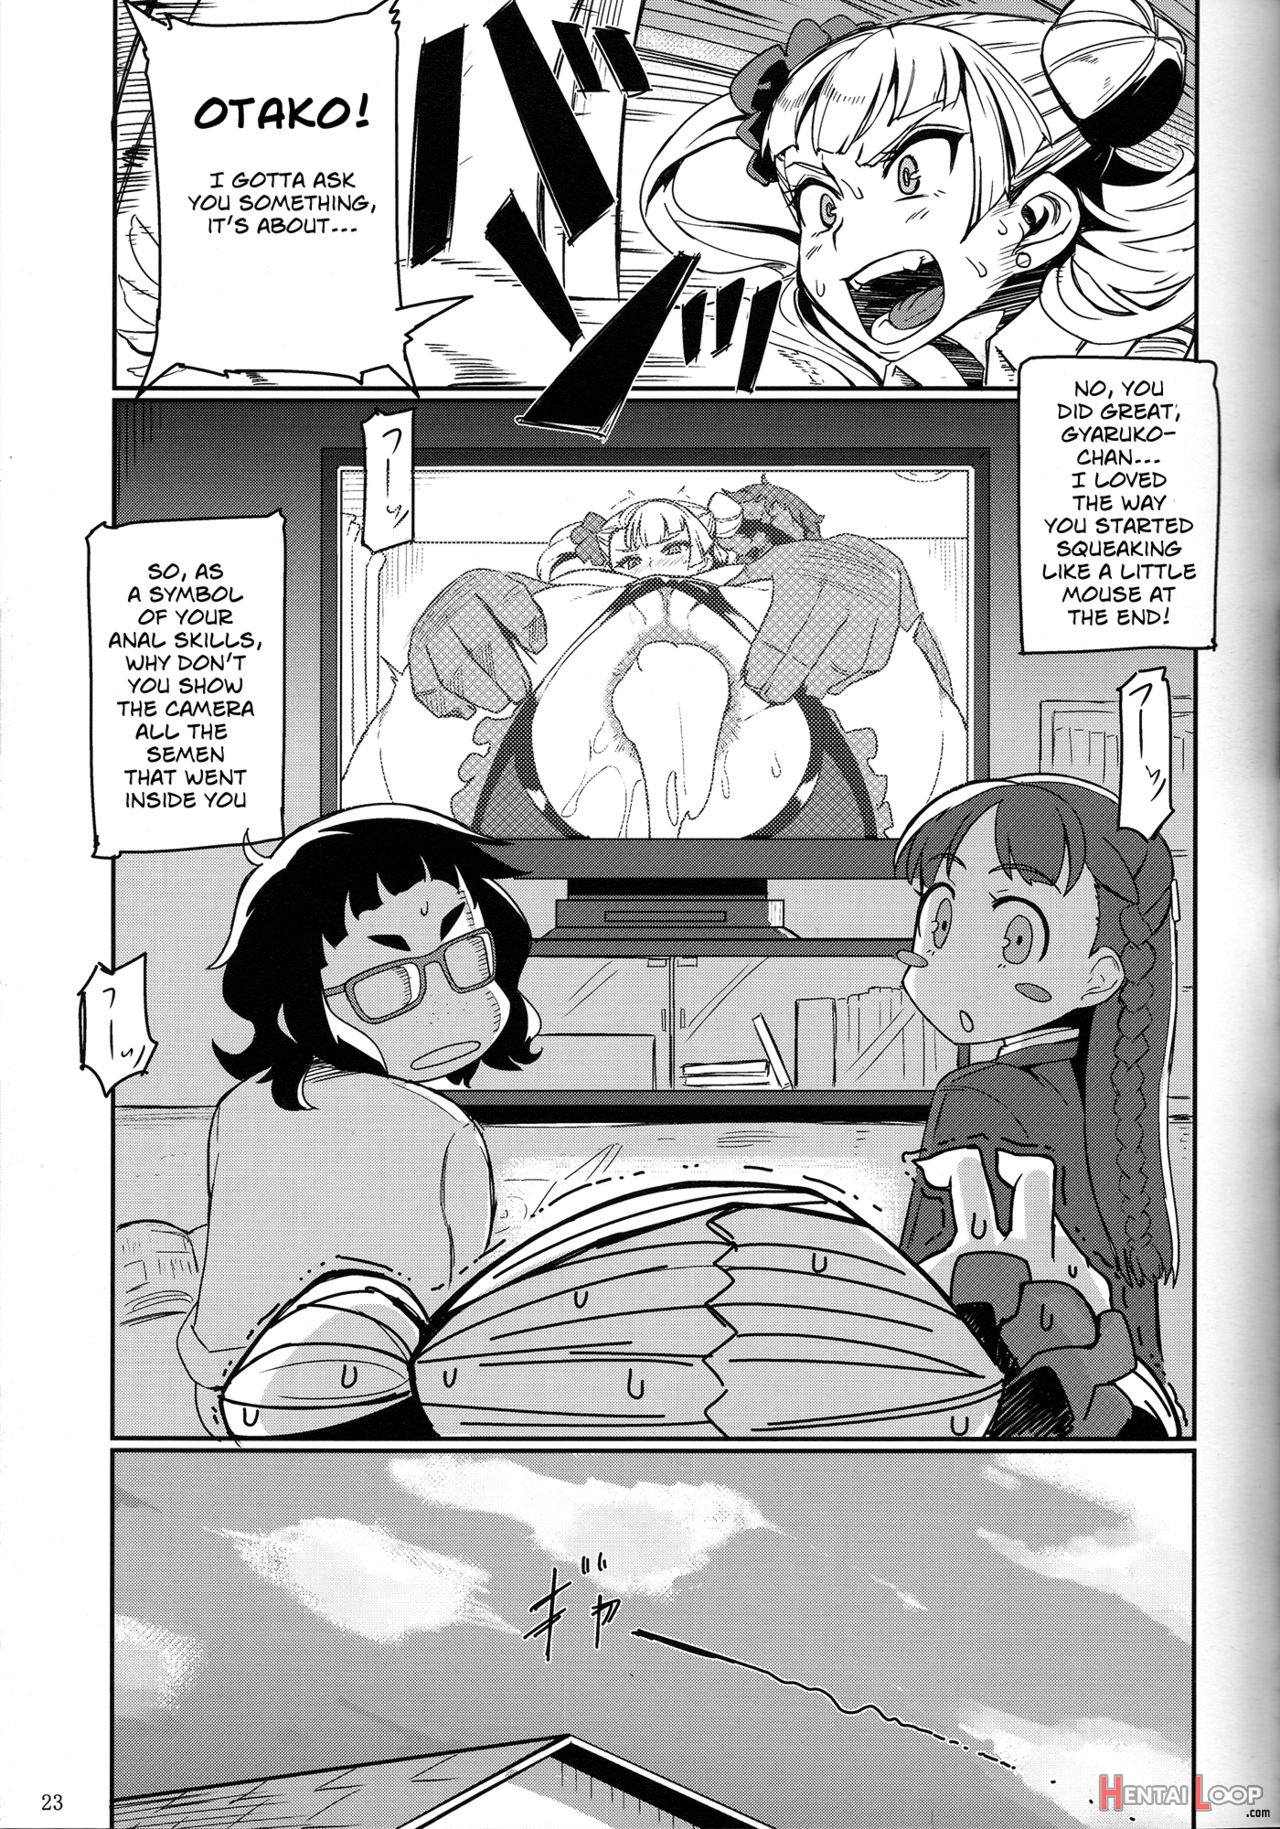 Galko Ah! page 22